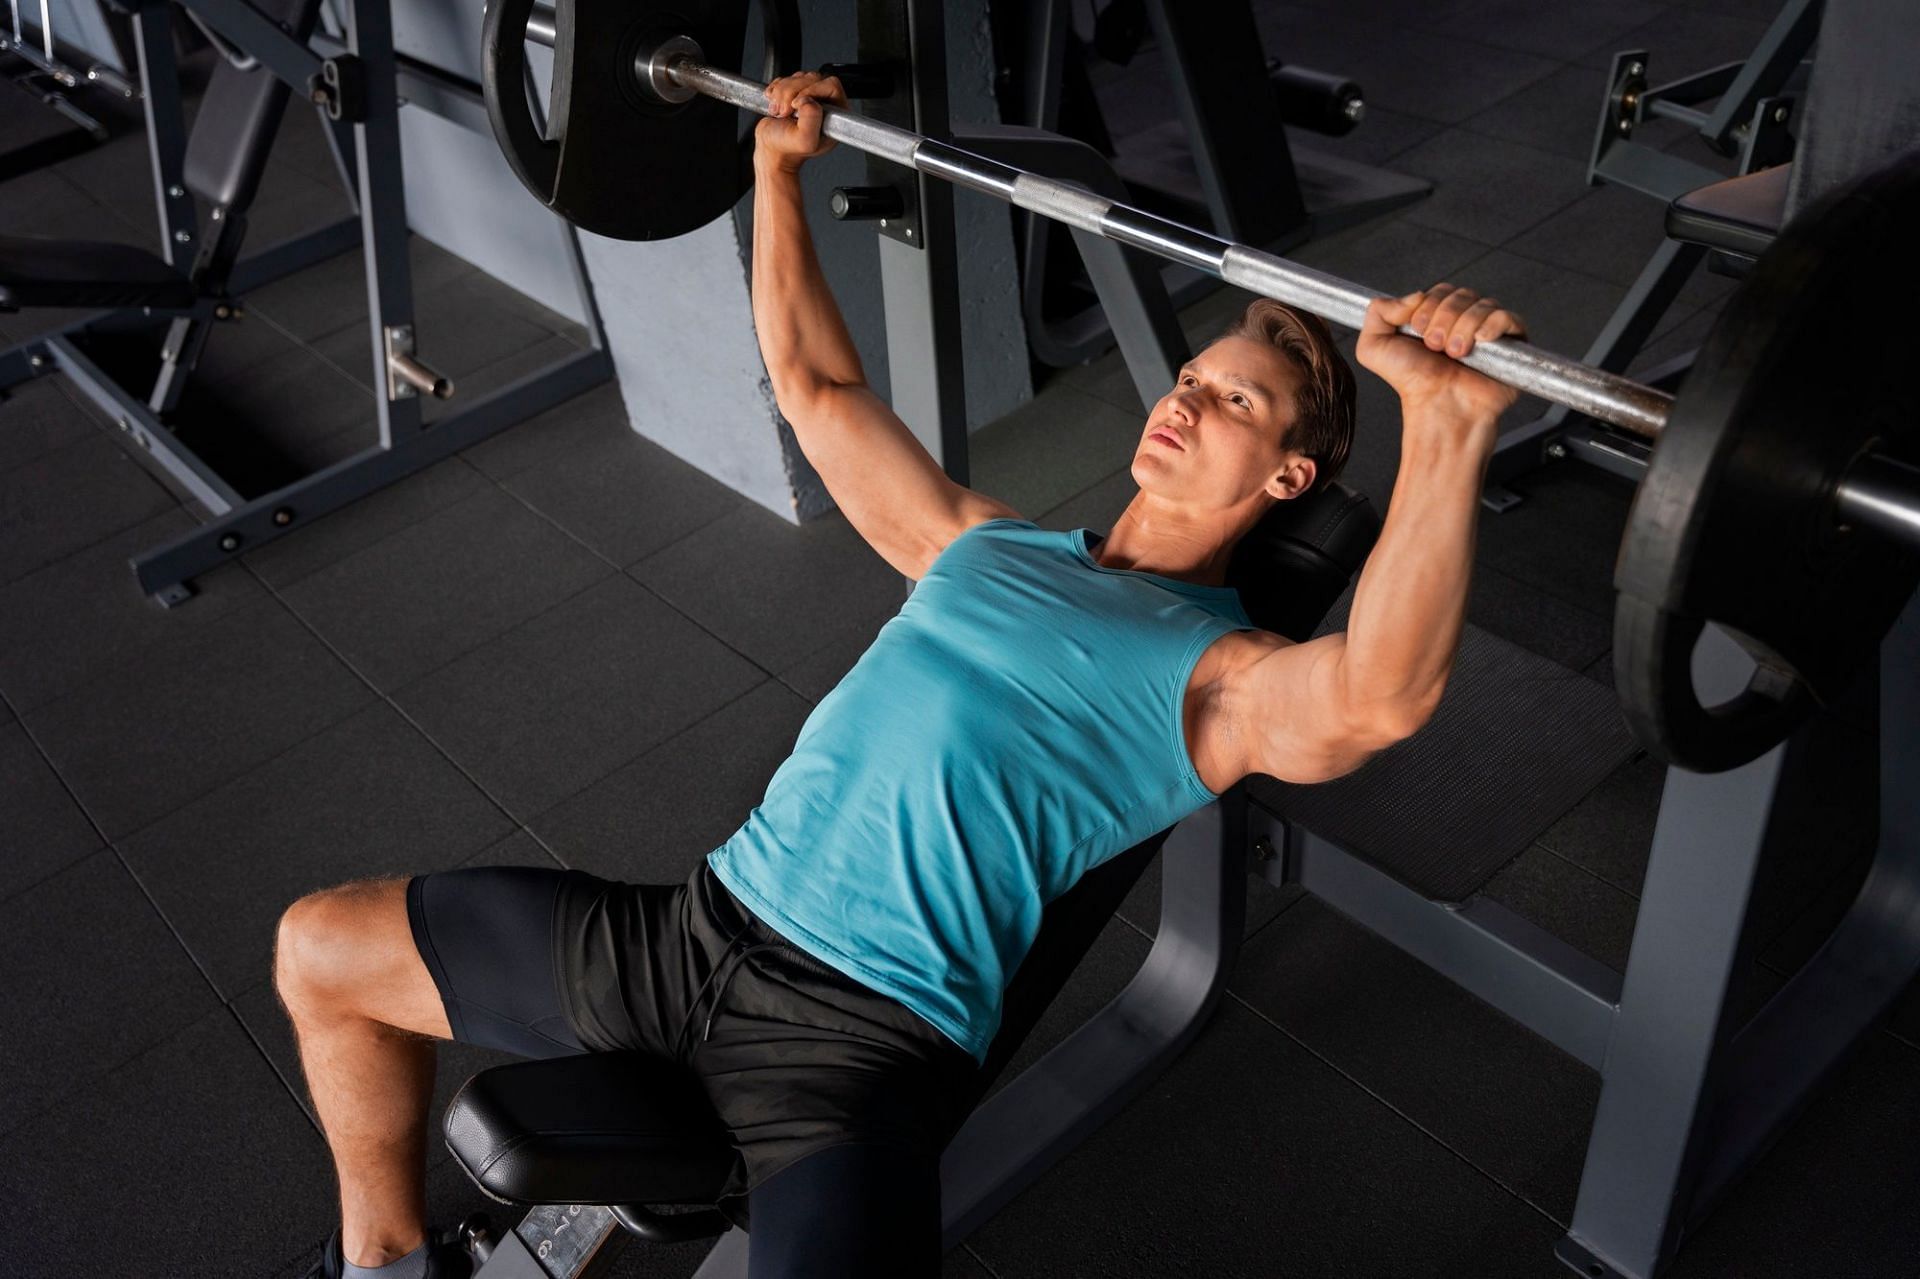 Include the Jm press for an explosive tricep head workout. (Image via Freepik)